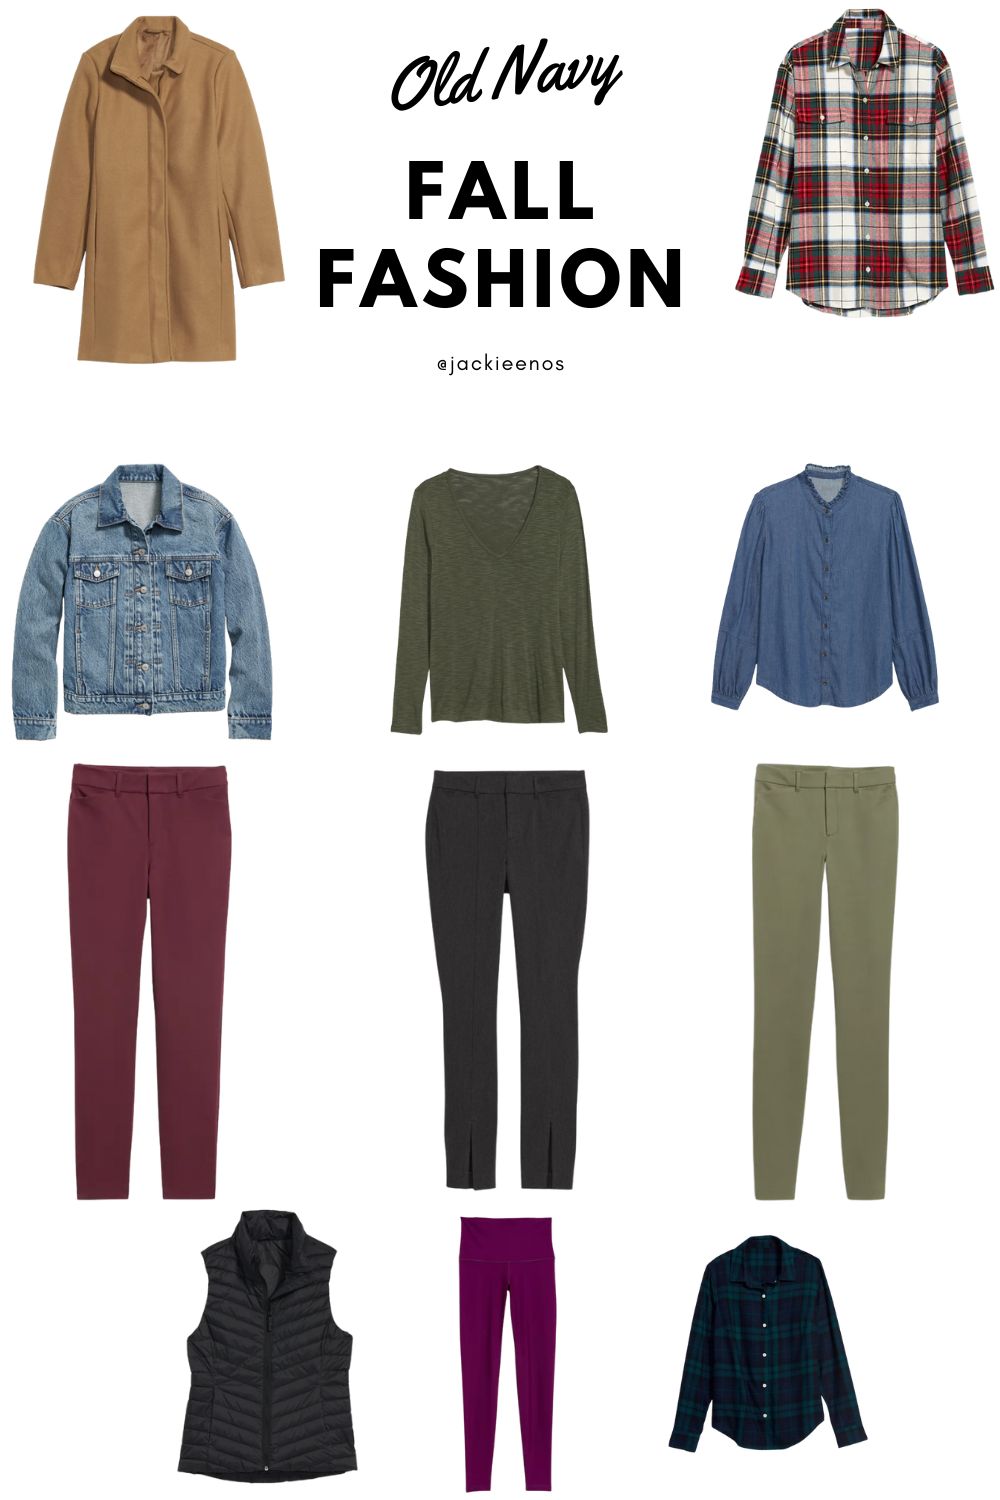 old navy fall fashion